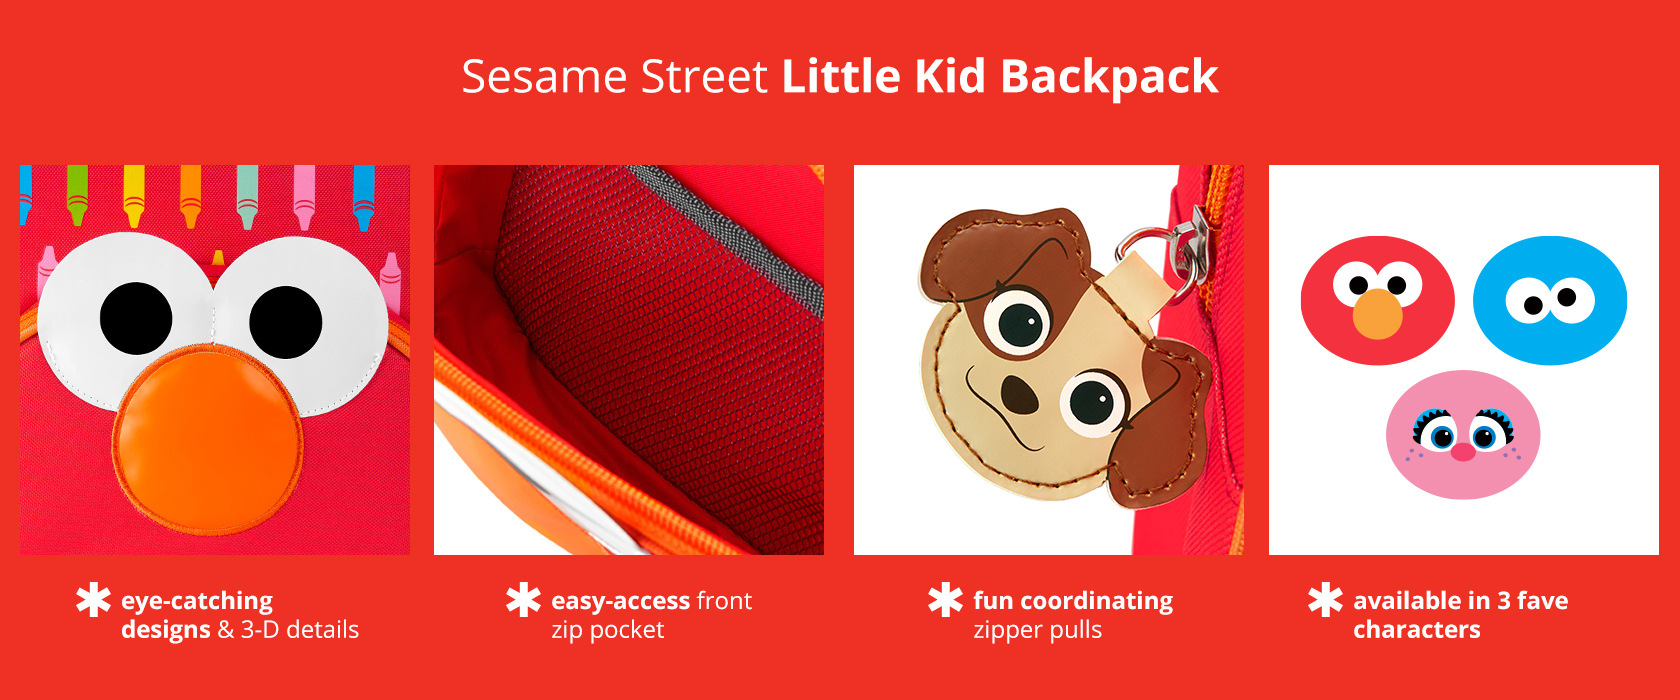 Skip Hop x Sesame Street Little Kid Backpack has eye-catching designs, 3-D details, and an easy-
access front zip pocket with fun coordinating zipper pulls. Available in 3 characters.